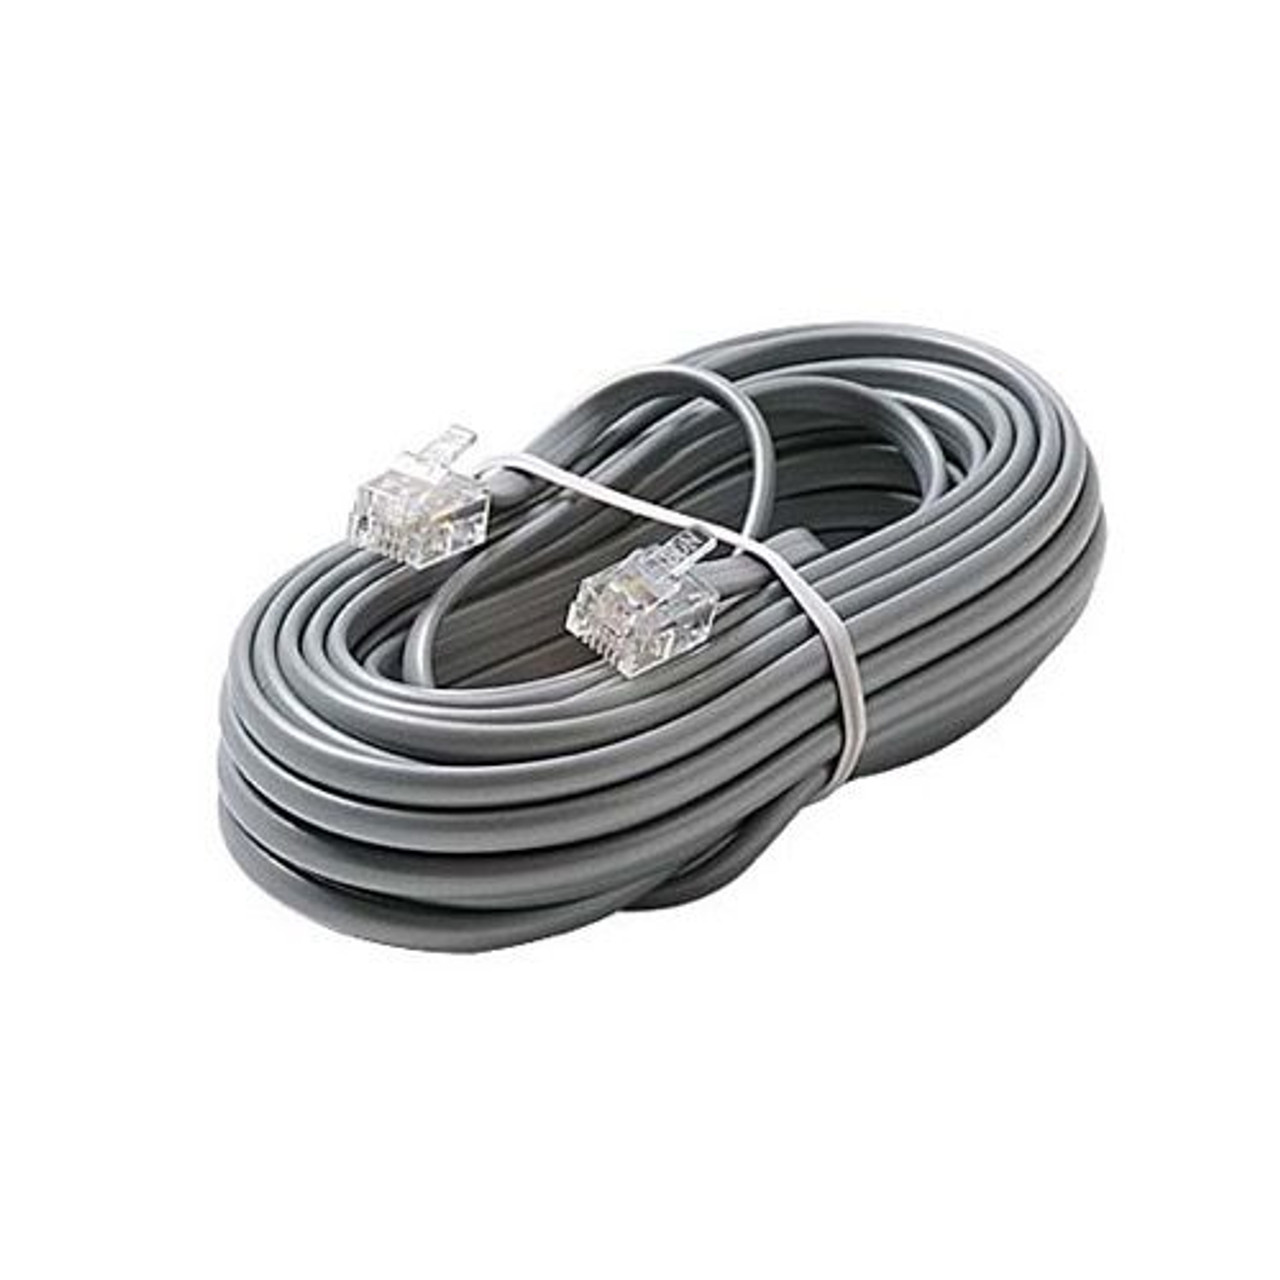 Eagle 25 FT Telephone Cord Flat Silver Satin 4 Conductor RJ11 6P4C Linecable Wire Male to Male Plug Modular Phone Plug Connector Each End Flat Telephone Cord Cross-Wired for VoIP Cable Line Connector